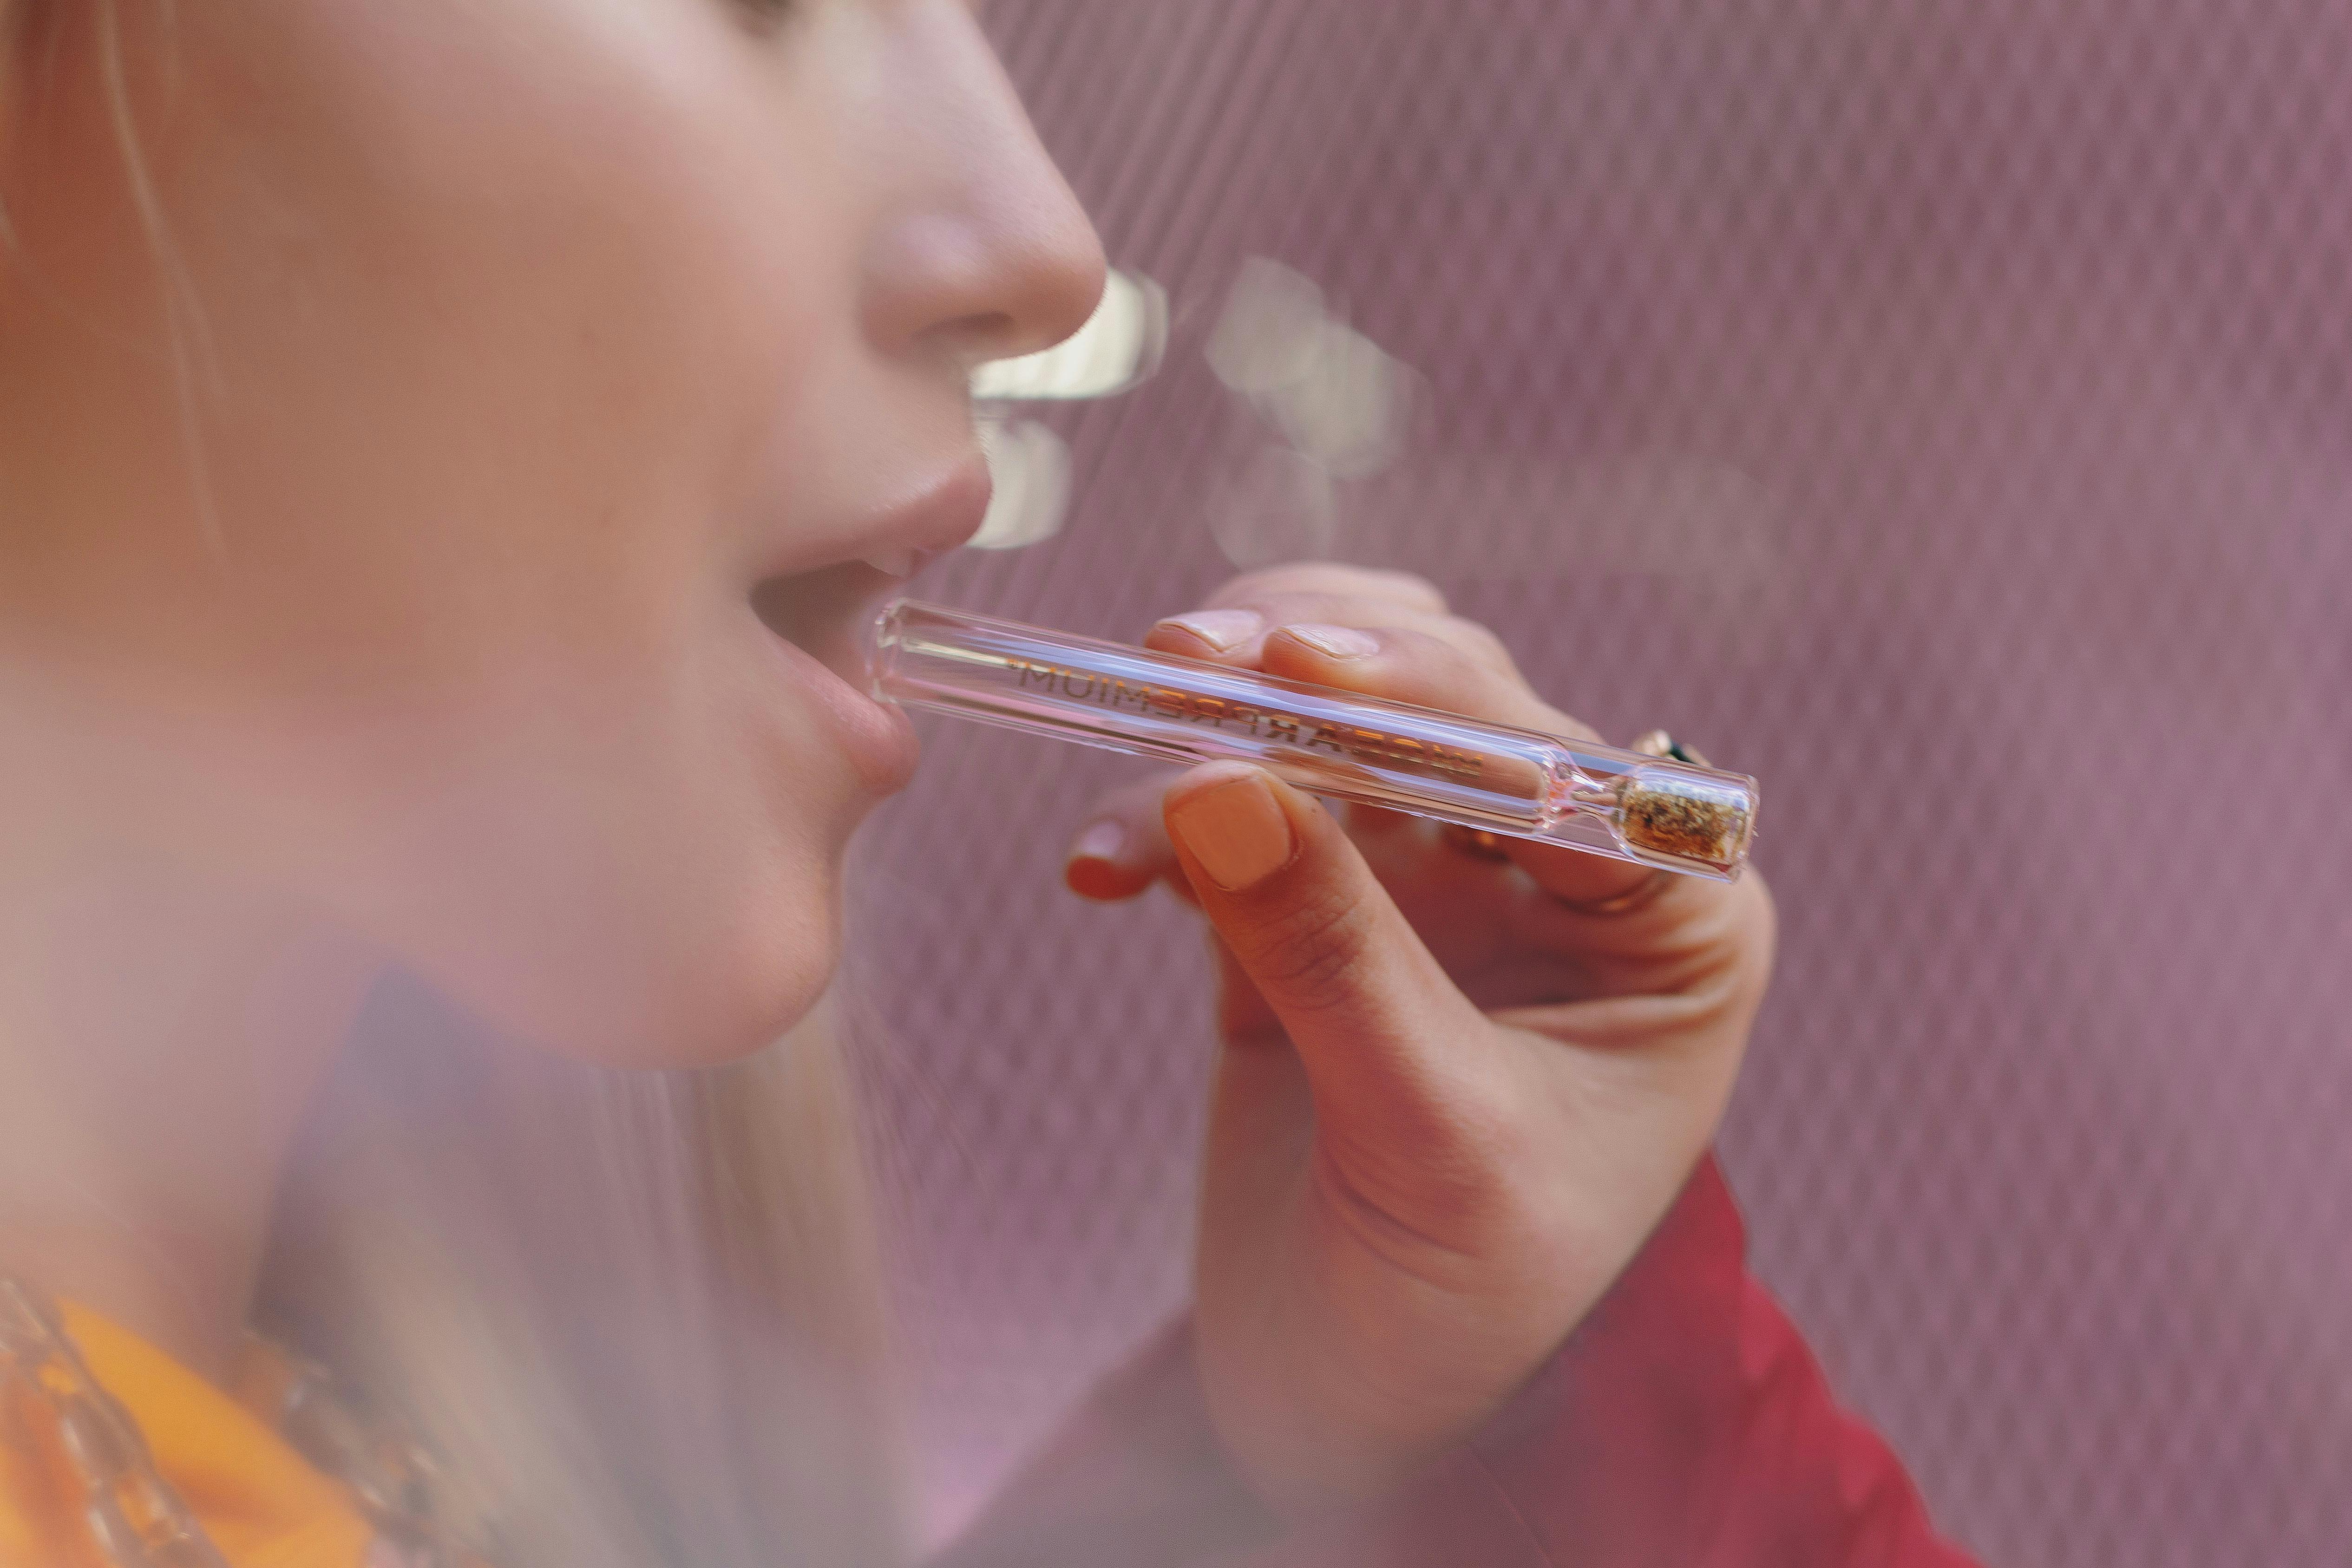 photo of What is a One Hitter? How To Use A One Hitter To Smoke Cannabis image